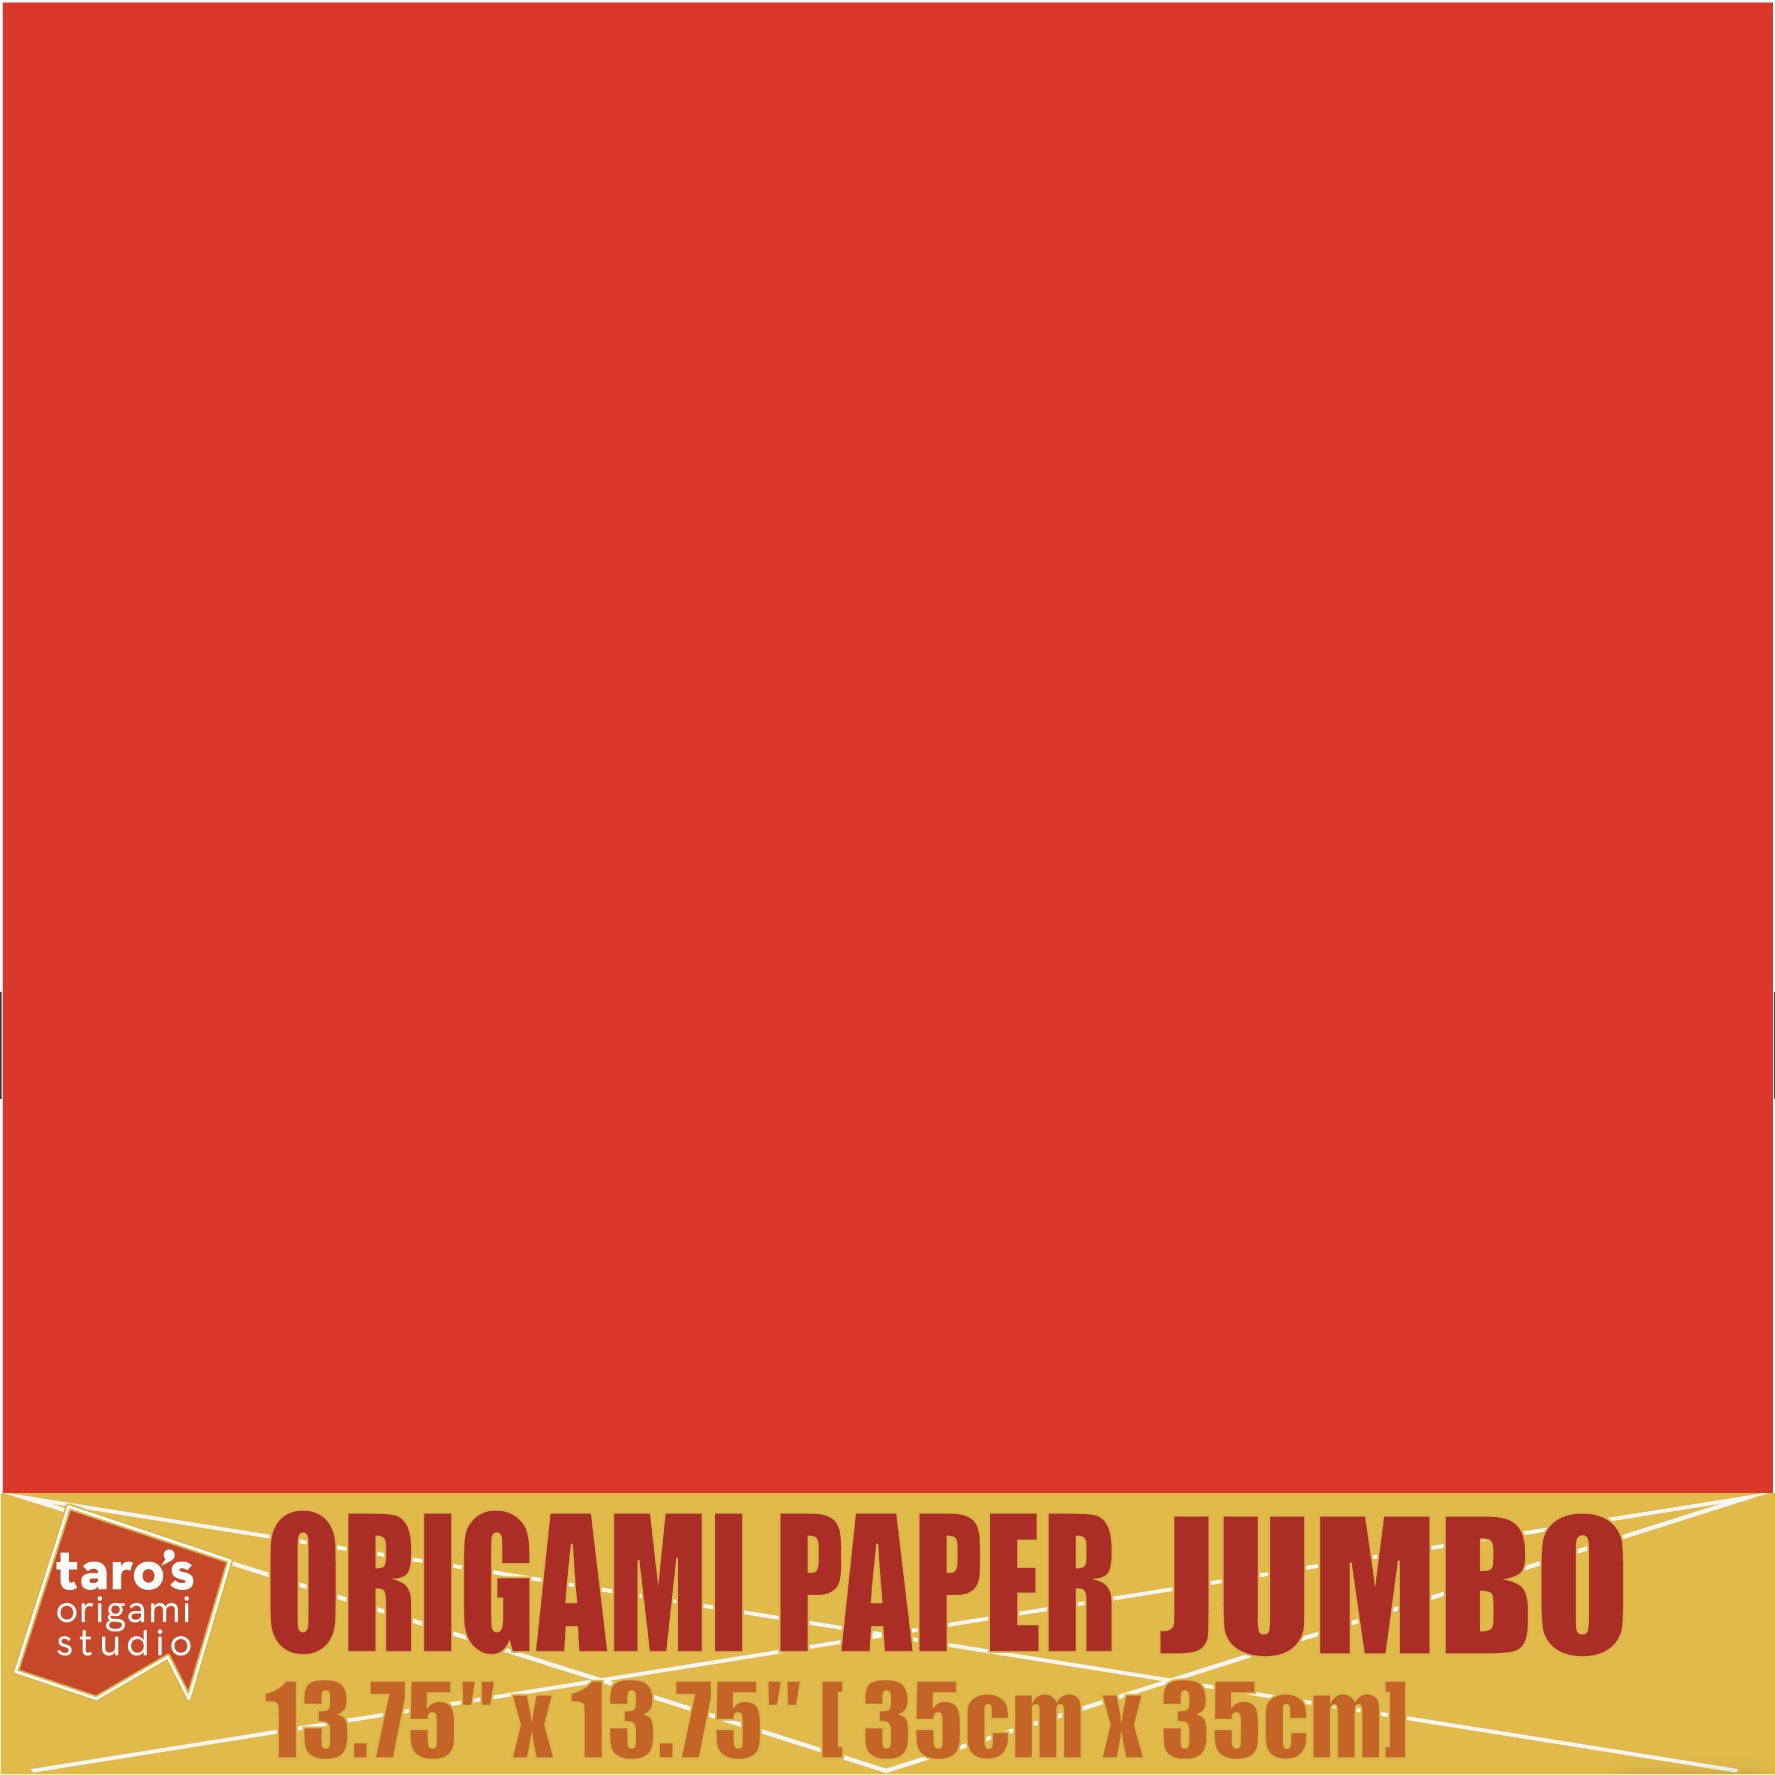 [Taro's Origami Studio] tant Large 10 inch (25 cm) Double Sided Single Color (Red) 20 Sheets (All Same Color) for Origami Artist from Beginner to